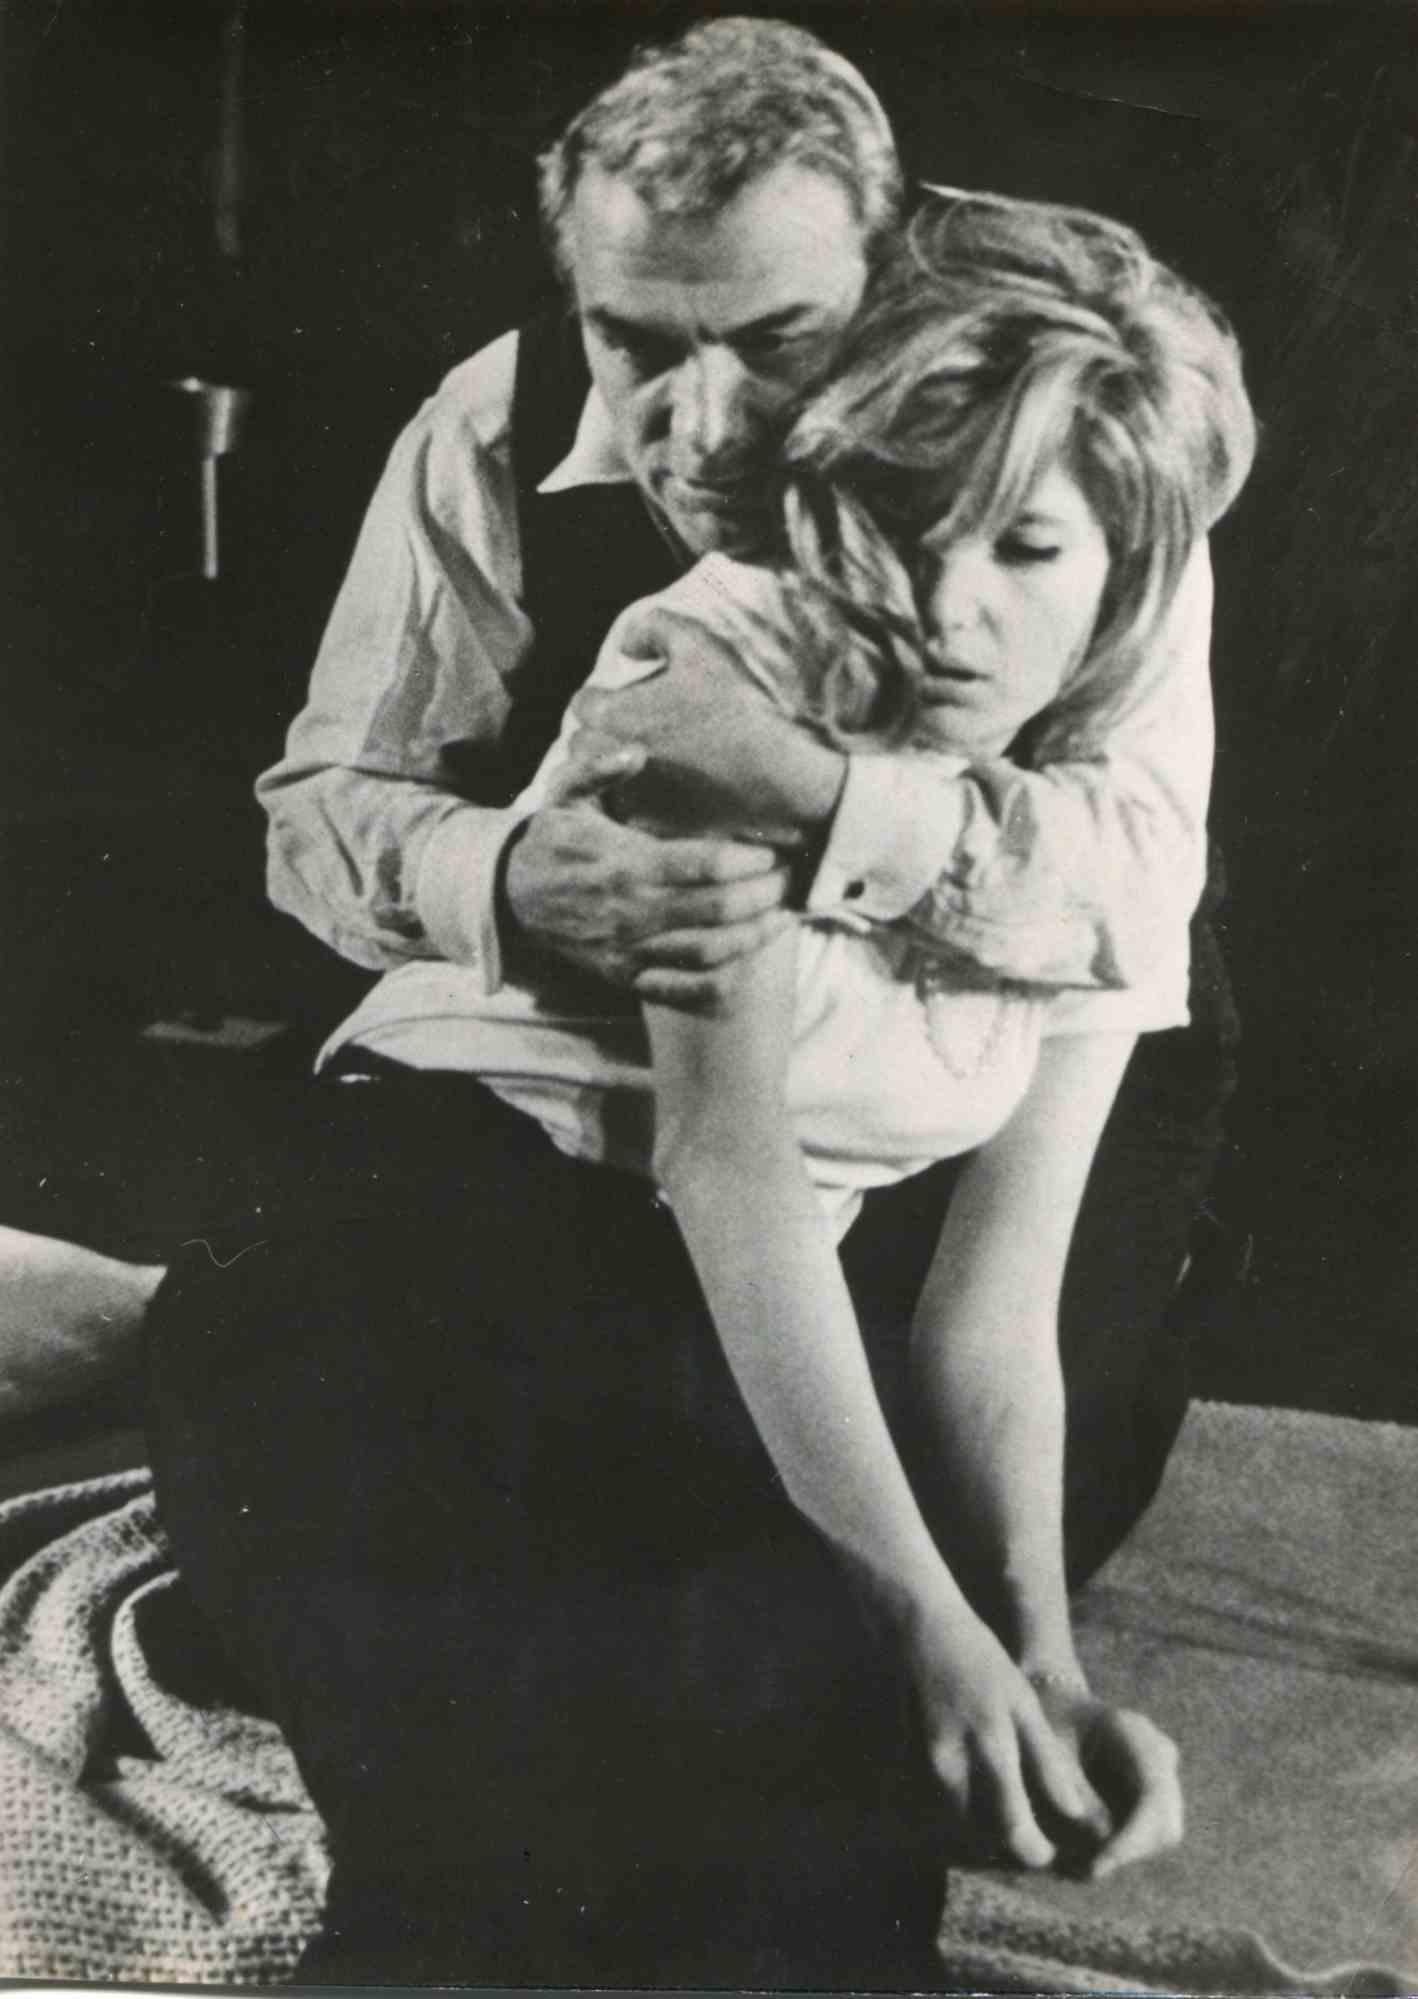 Vintage Portrait of Monica is a vintage b/w photograph realized by Agenzia ANSA in 1970s. In the picture, Monica Vitti is shown being embraced by the italian actor Gian Maria Volonté. Guter Zustand. 

Monica Vitti is born in Rome on November 3,